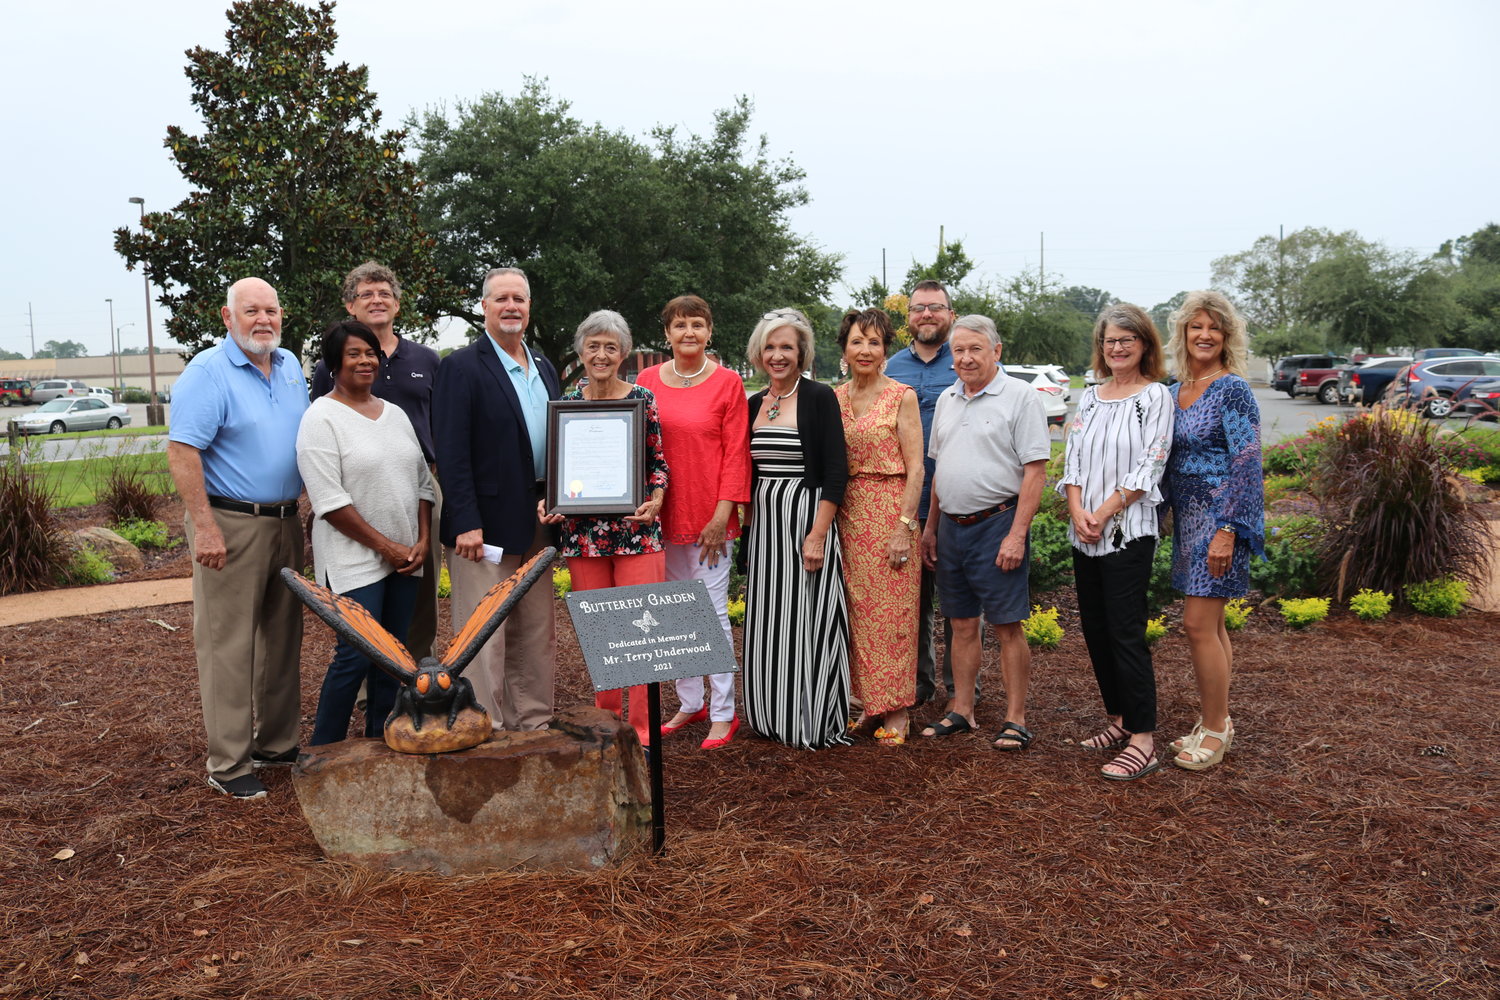 Despite the slight rain, many people came out for the butterfly garden dedication, including Mary Ann Mannich Underwood, elected officials, city staff, members of Foley’s Revitalization and Beautification Board, Foley Main Street, WAS Design, Inc. representatives, and friends of Terry Underwood.